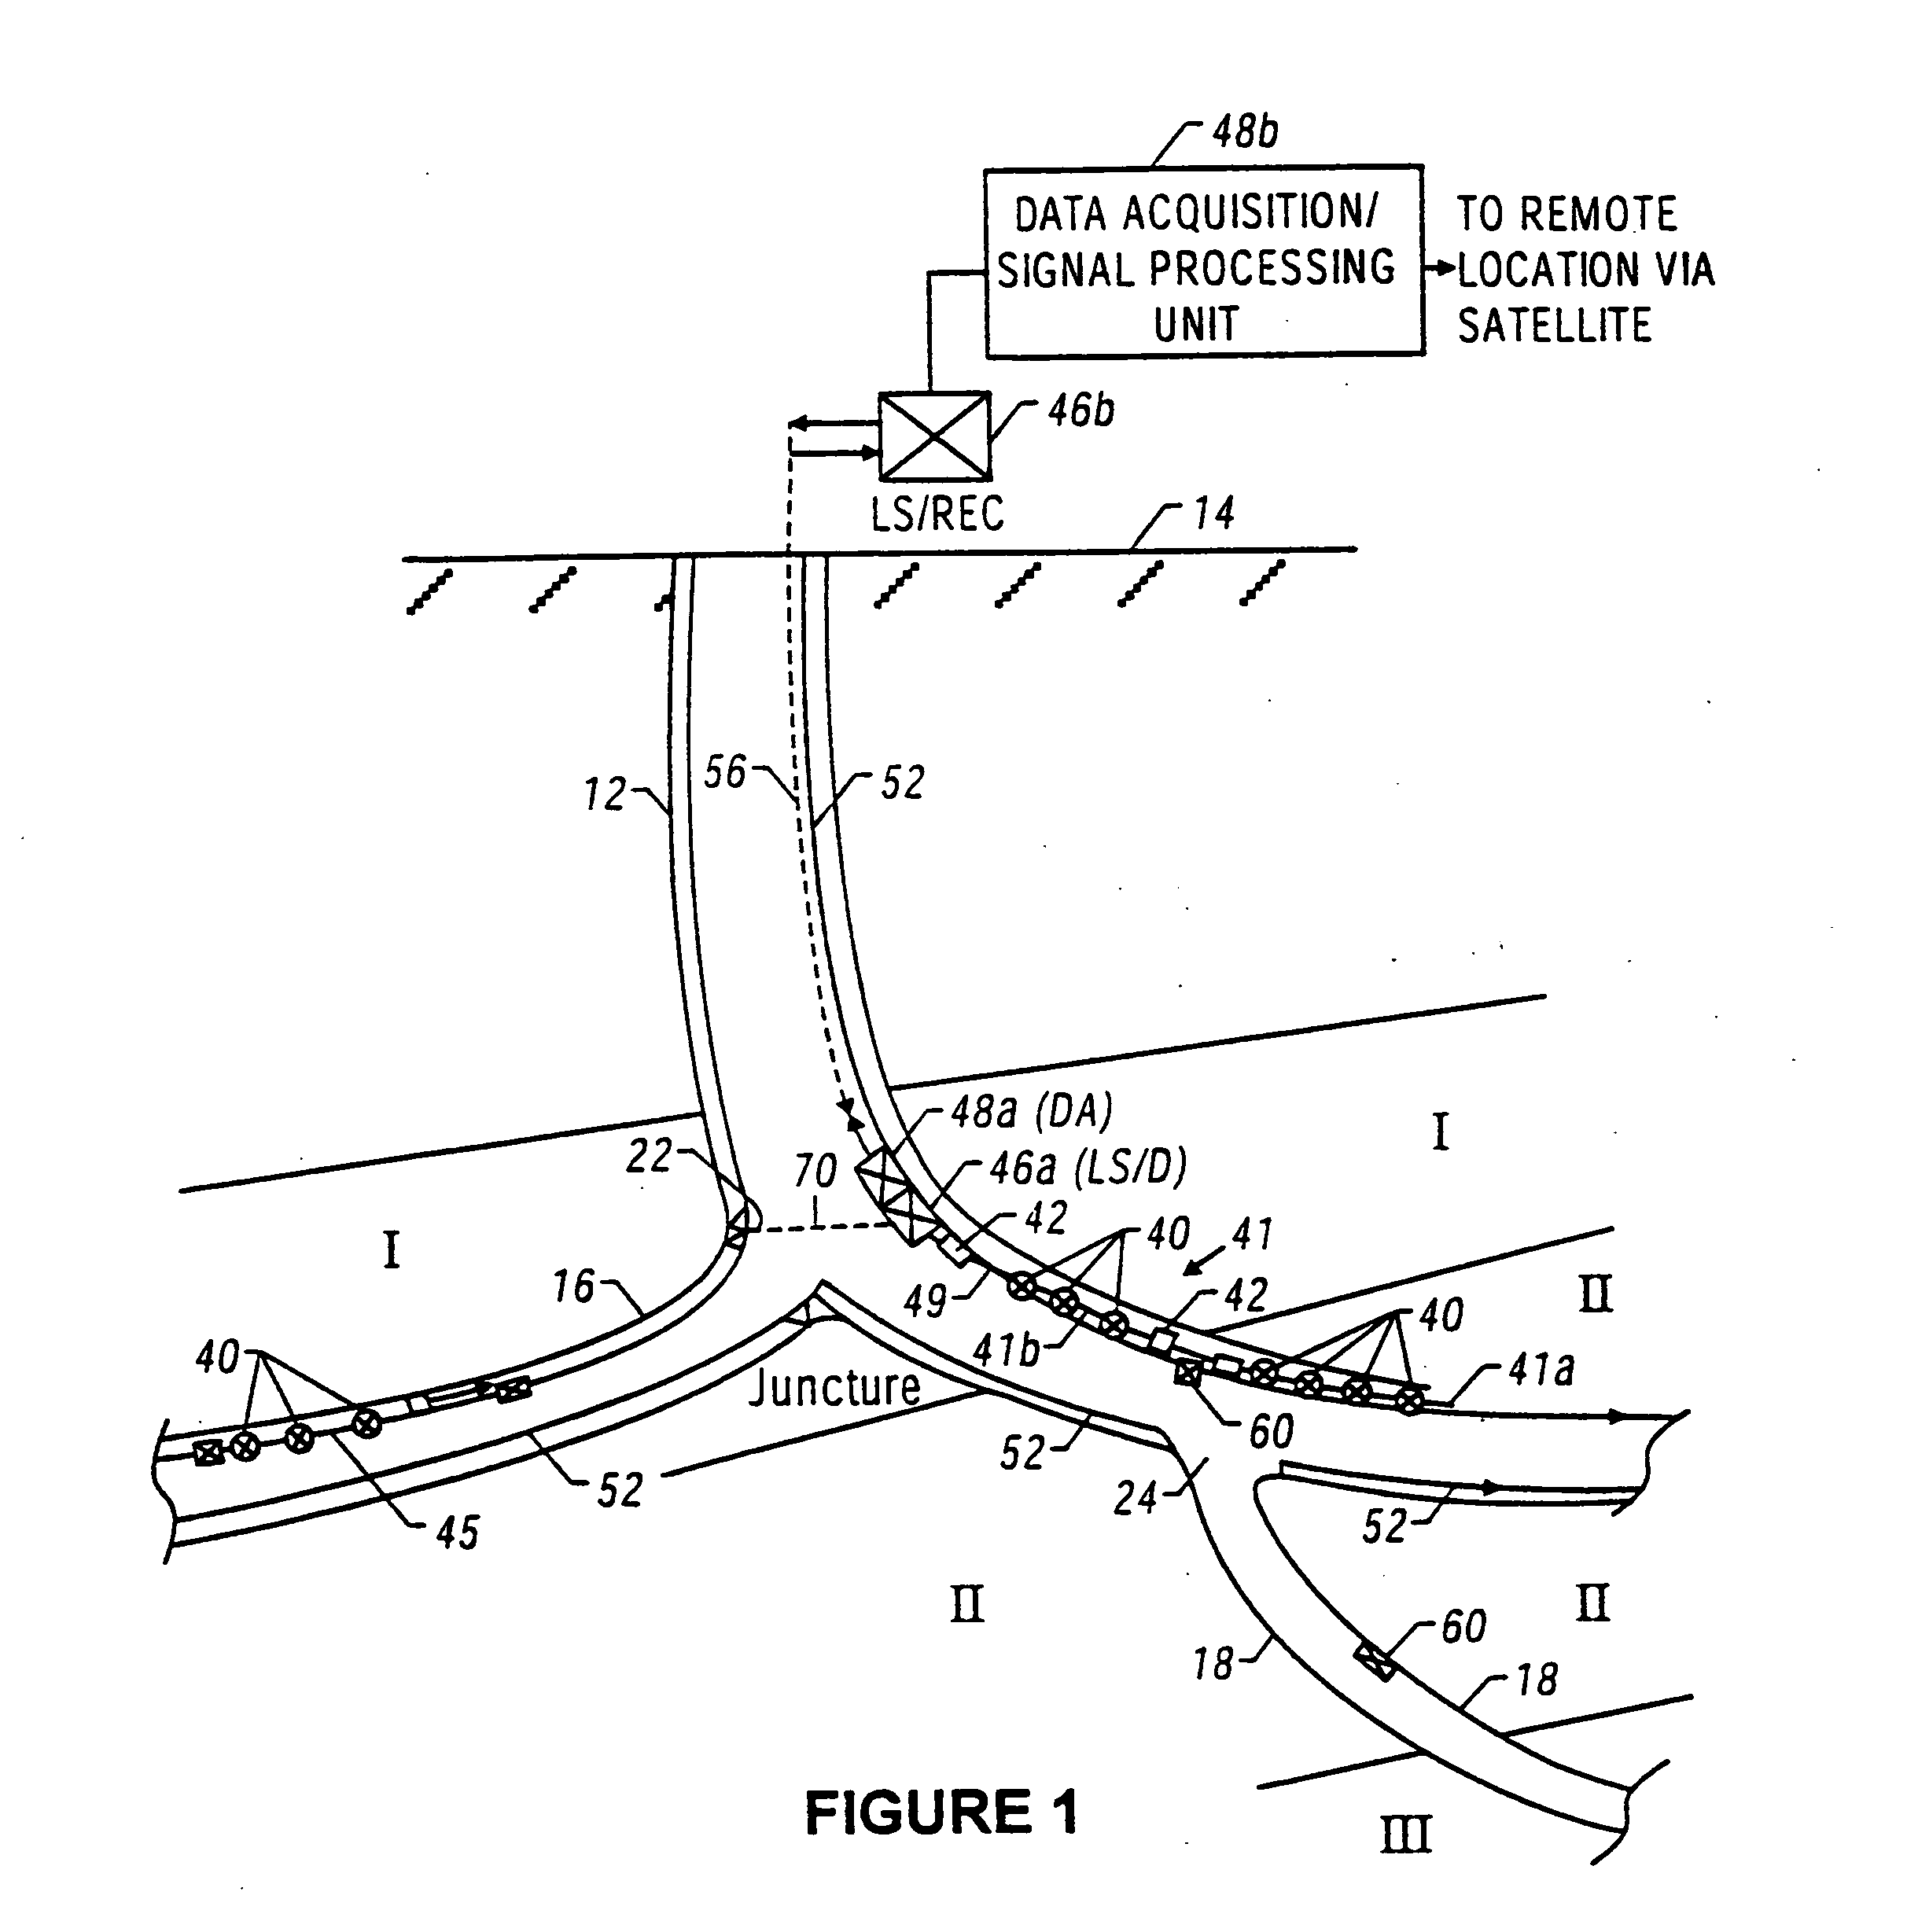 Providing a light cell in a wellbore